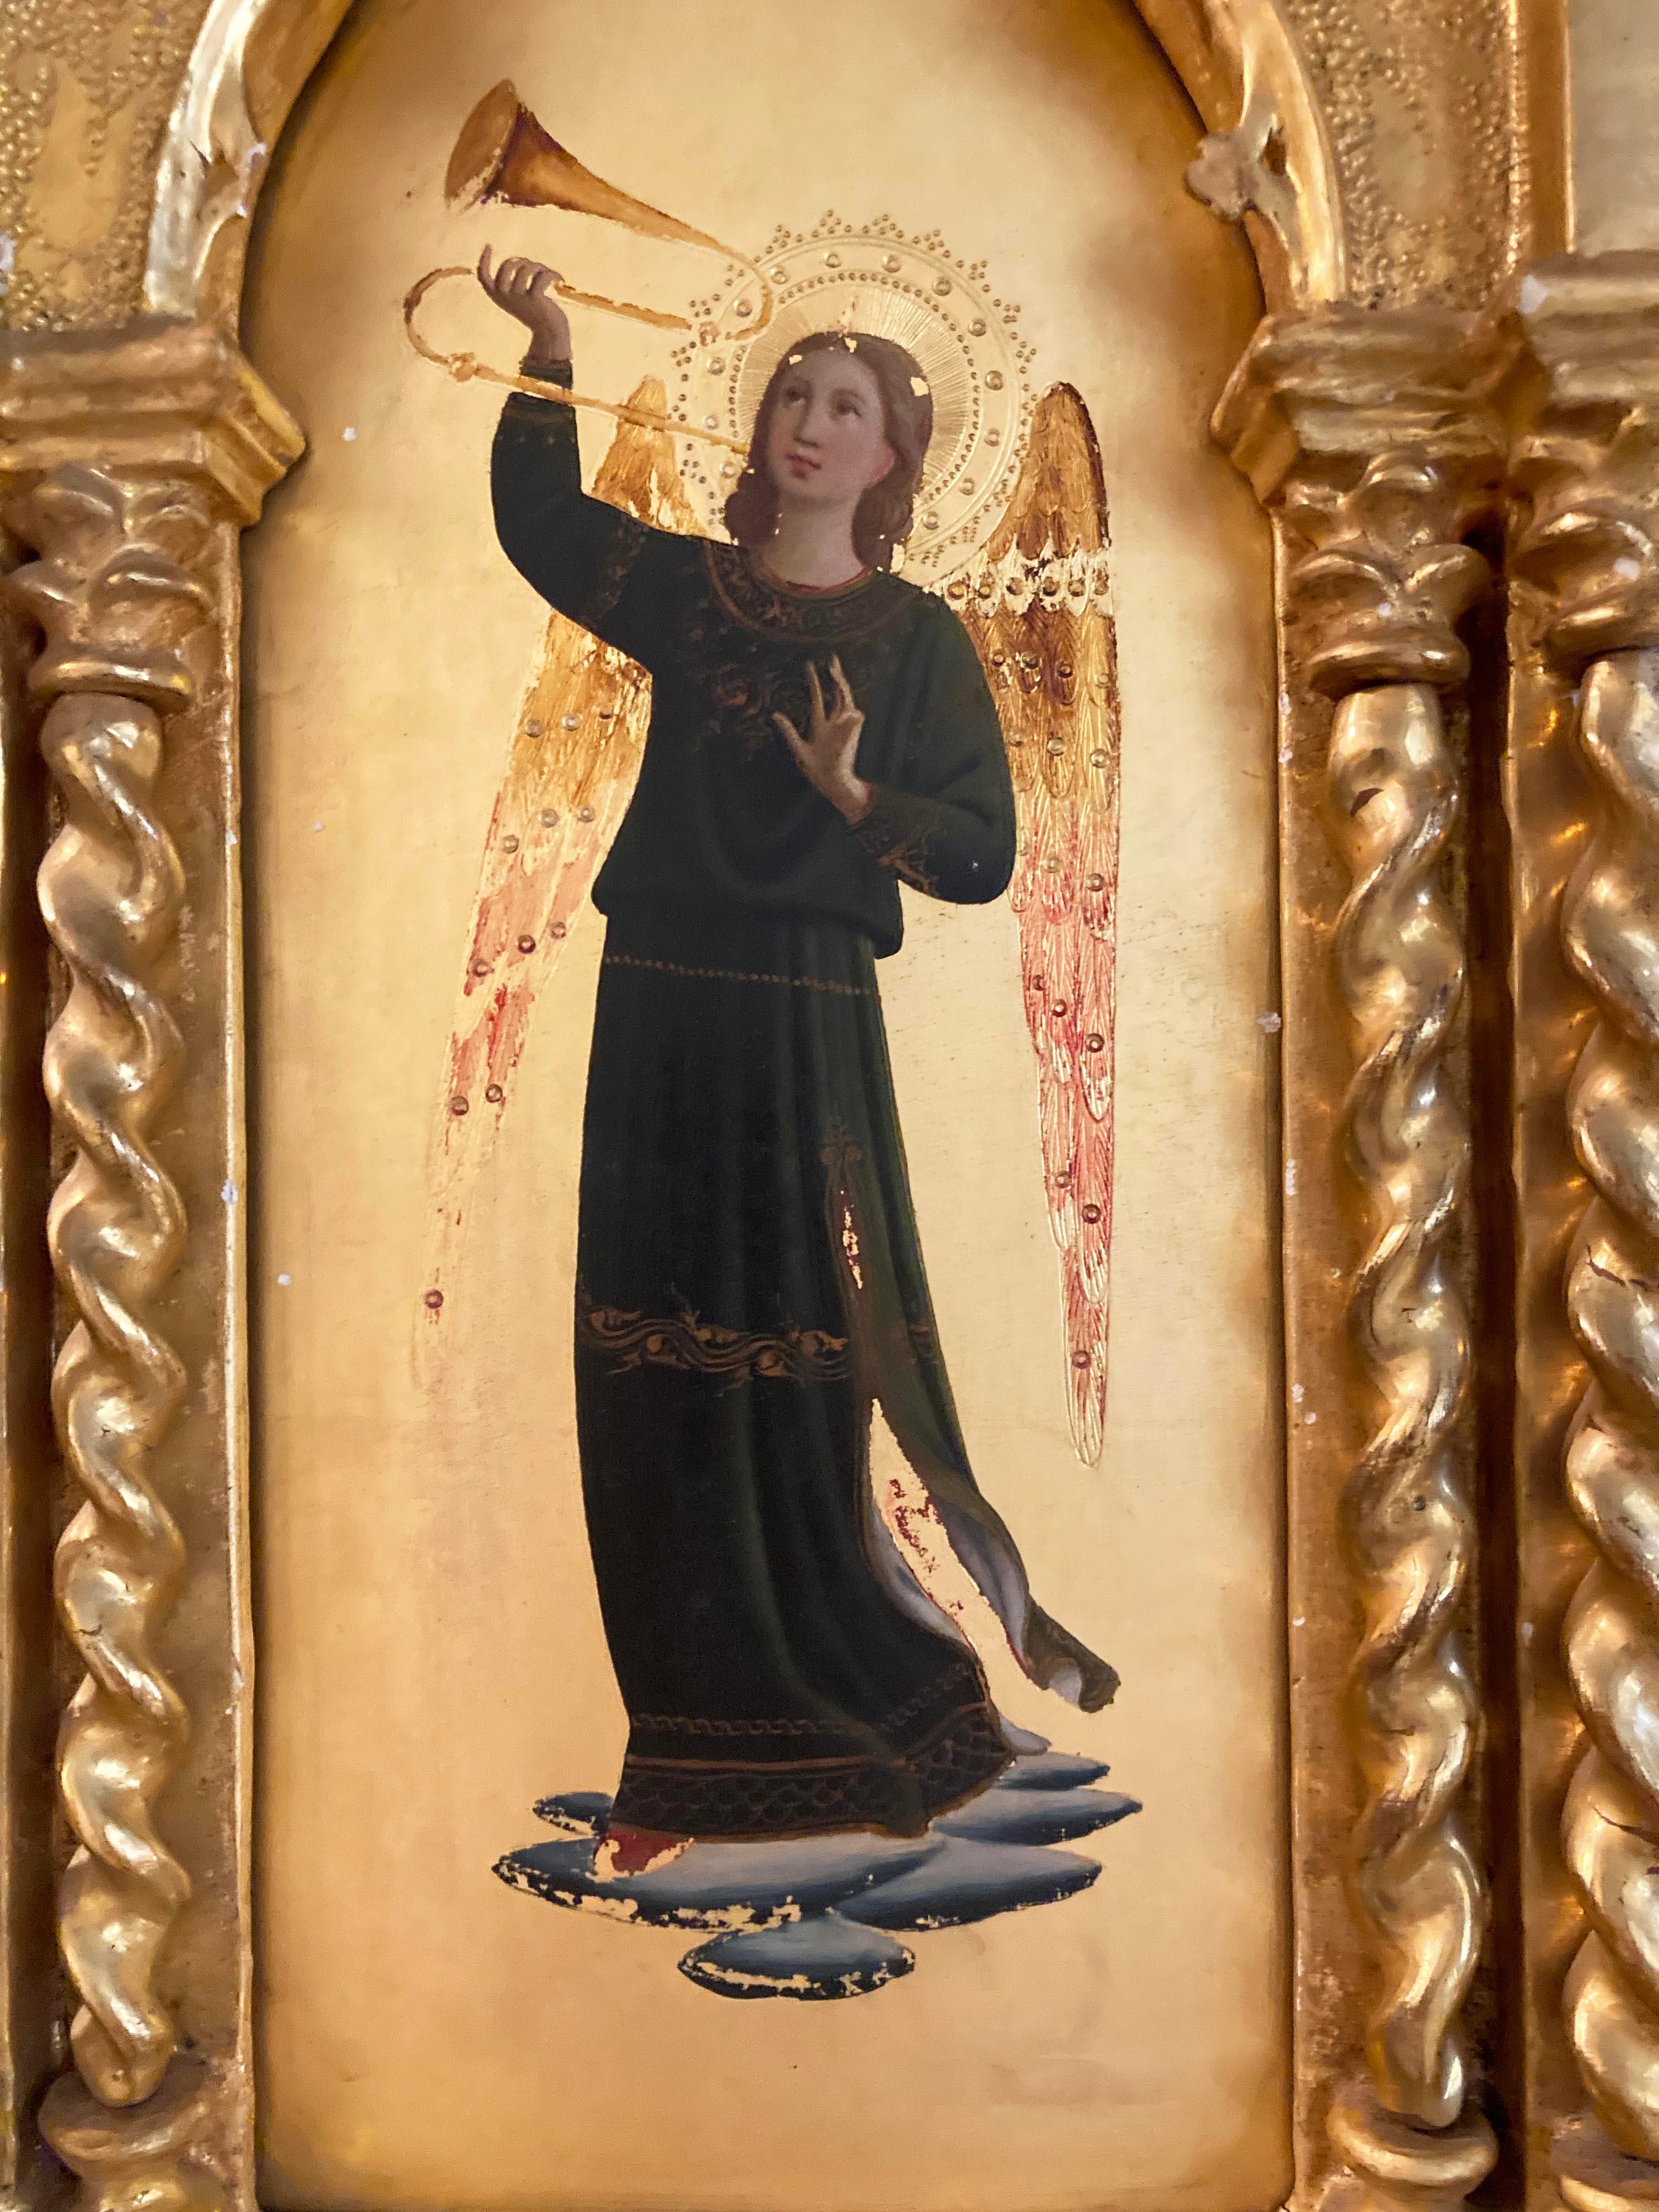 Two gilt framed Gothic Angels framed and painted in the style of Fra Angelico - hand-carved in Italy in 1890. These are in excellent condition with little to no paint chipping and wonderful colorfastness. The spiral spindles should be handled with